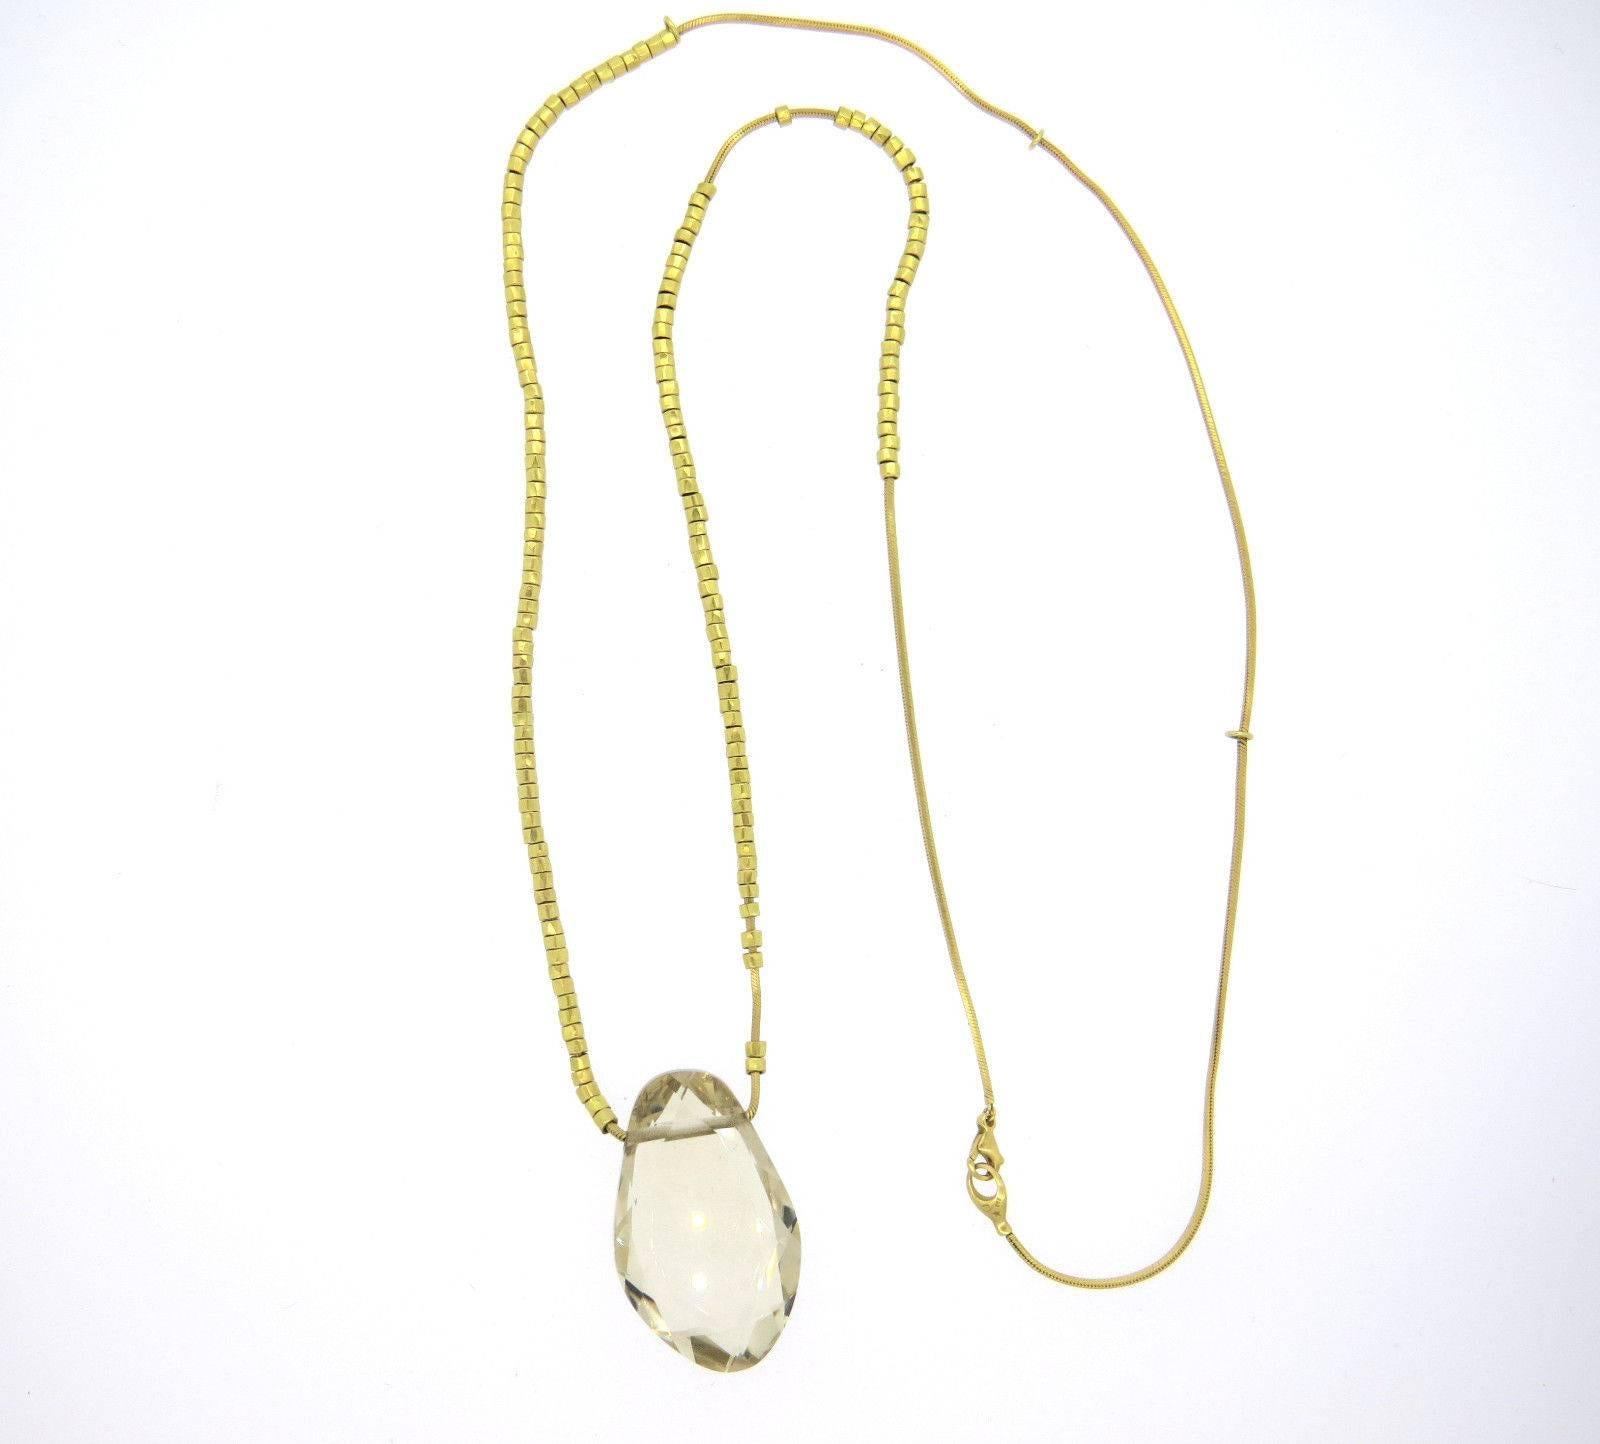 An 18k yellow gold necklace with a topaz pendant measuring 42mm x 26mm x 11.6mm.  Crafted by H. Stern, the necklace is 32